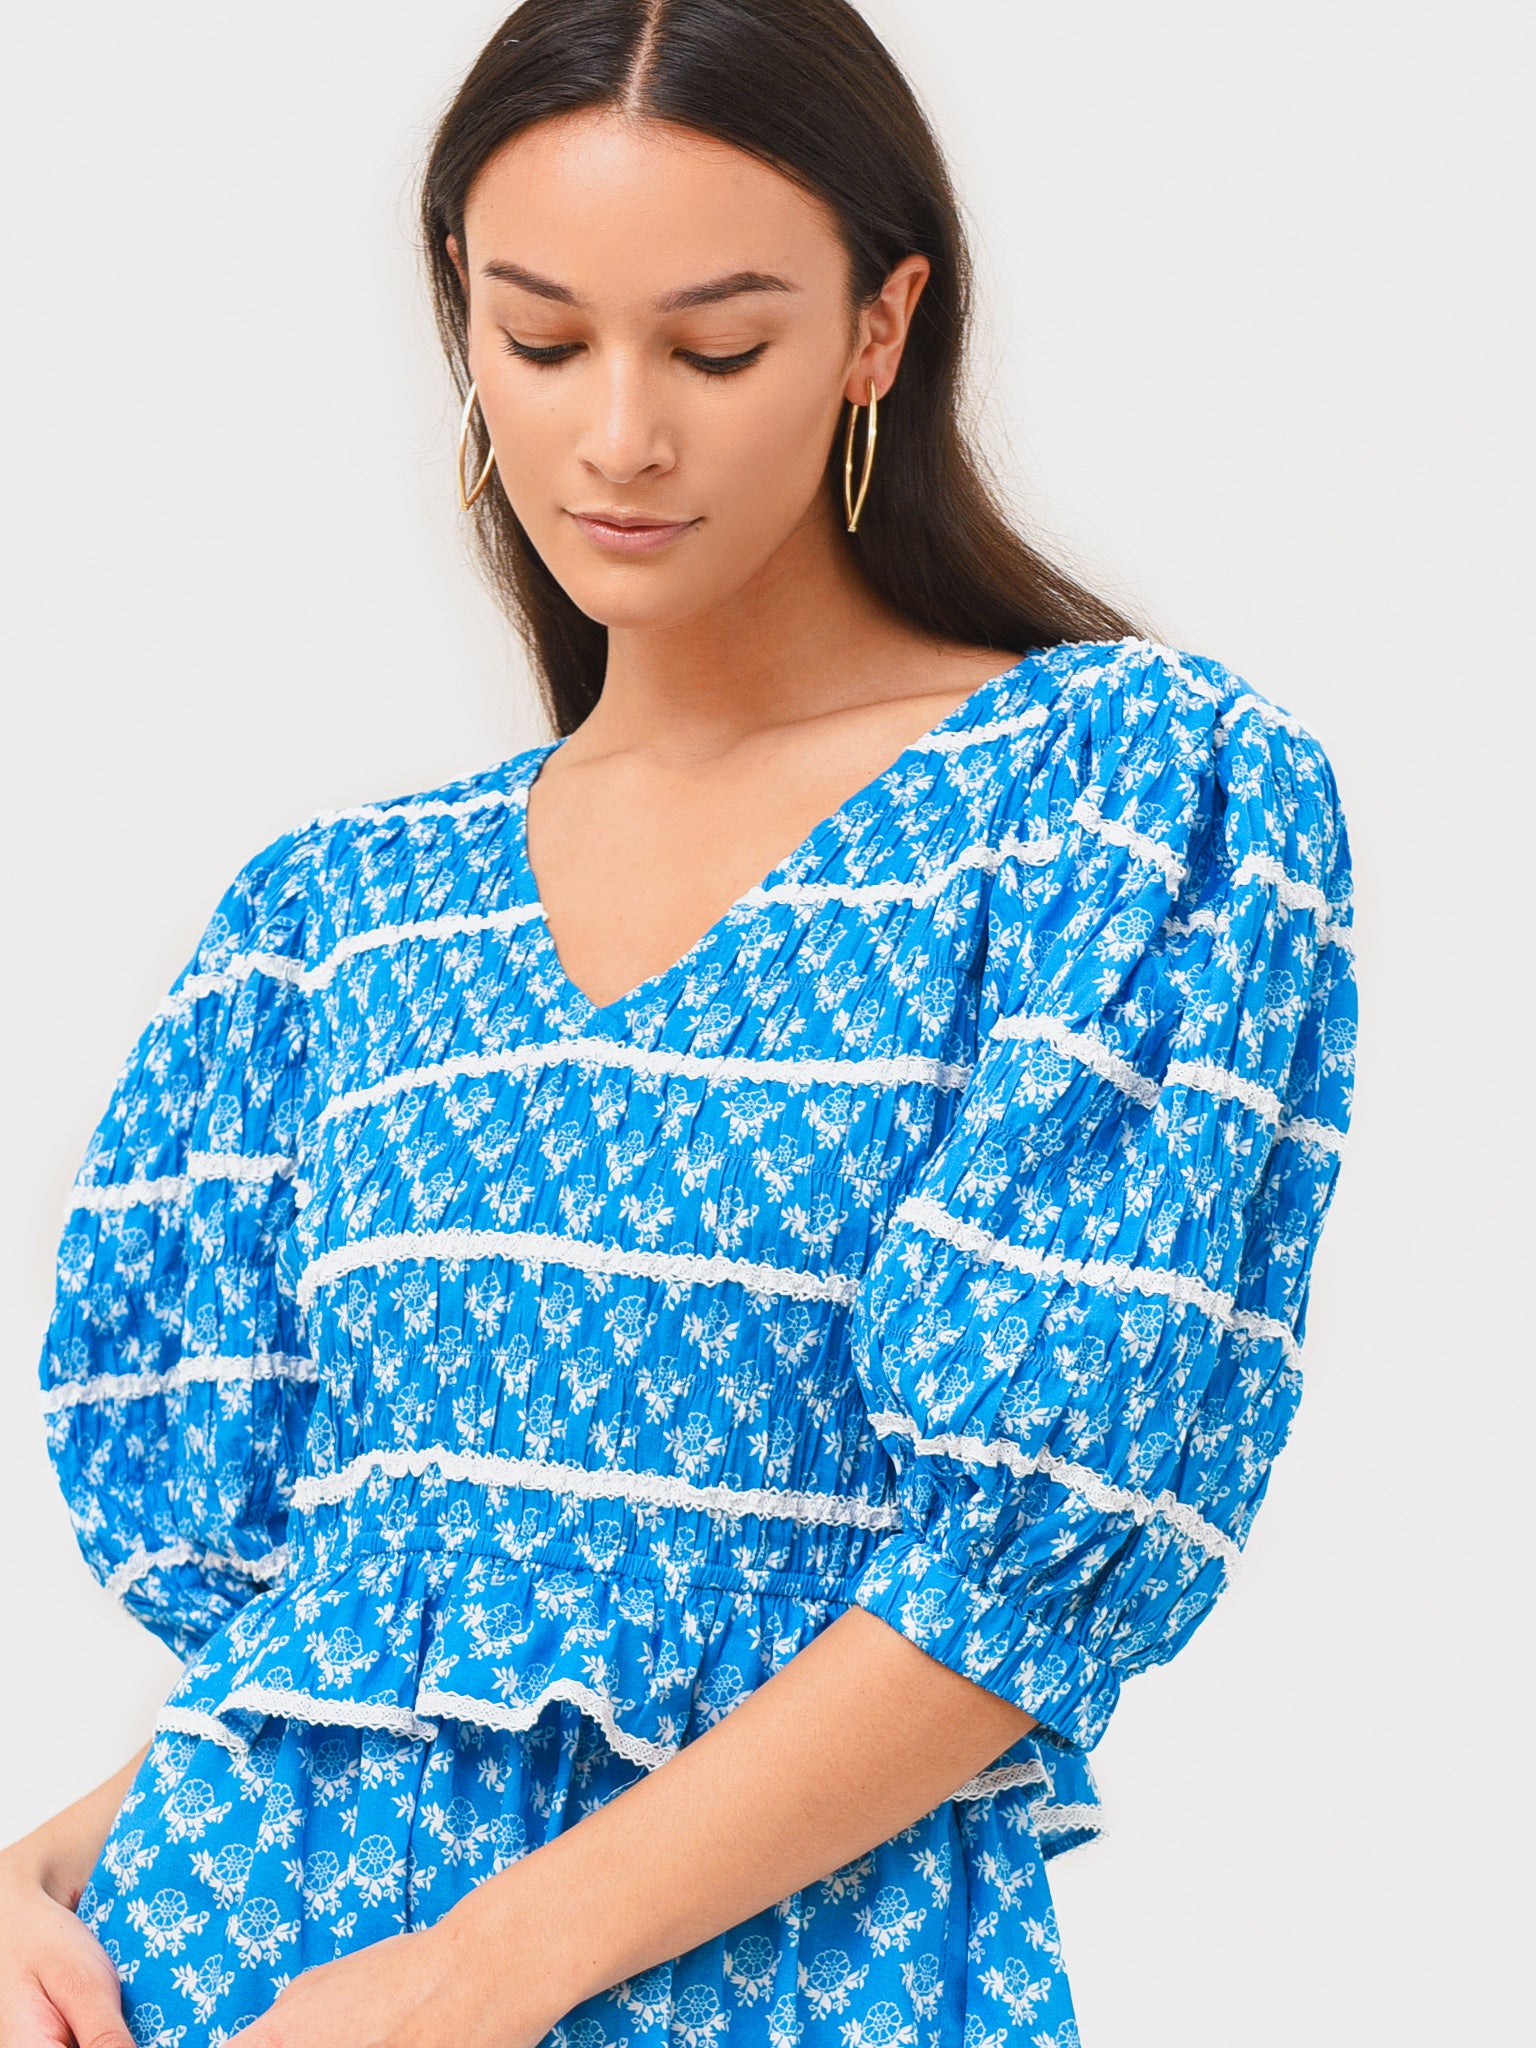 Josephine Smock top (sky blue) by seanwax - Off-the-shoulder tops - Afrikrea